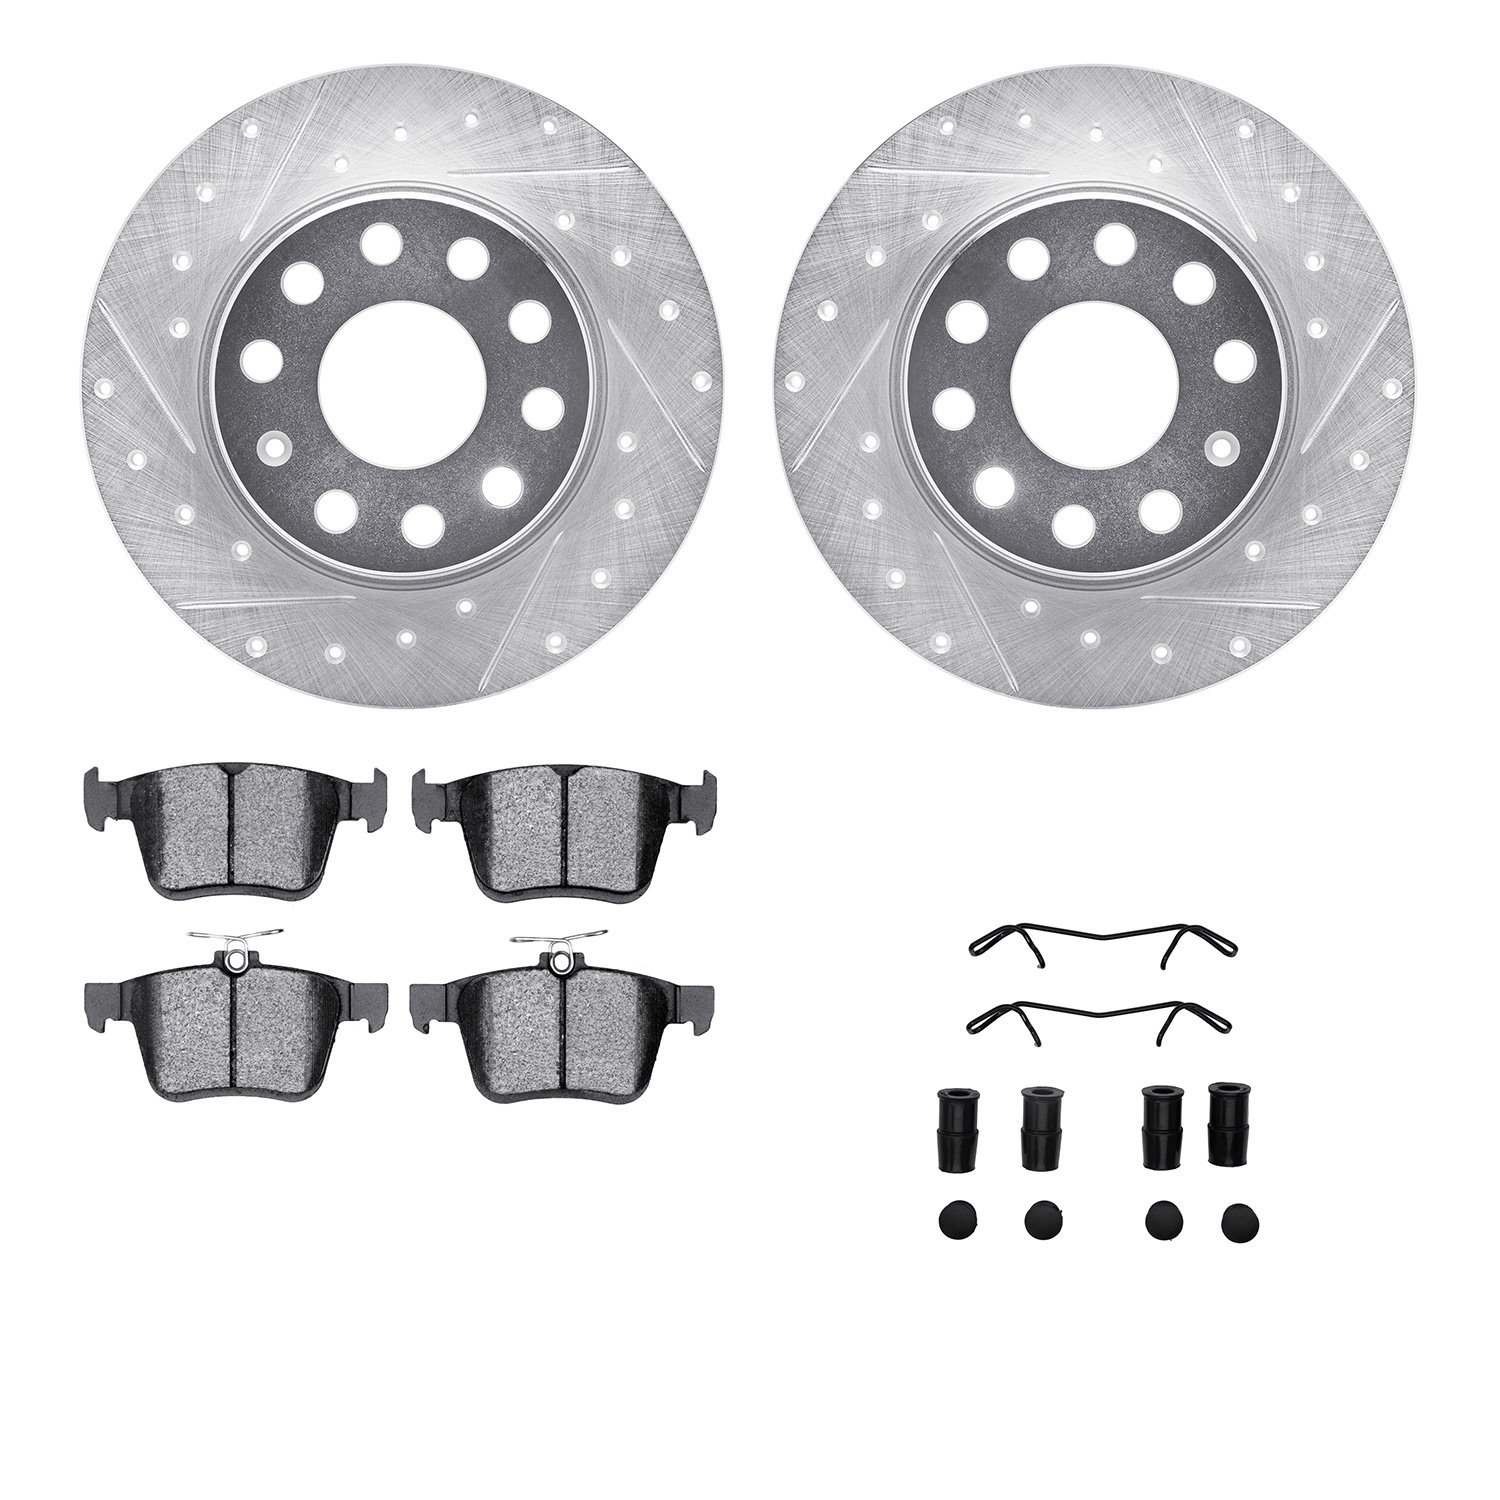 7512-74114 Drilled/Slotted Brake Rotors w/5000 Advanced Brake Pads Kit & Hardware [Silver], Fits Select Audi/Volkswagen, Positio